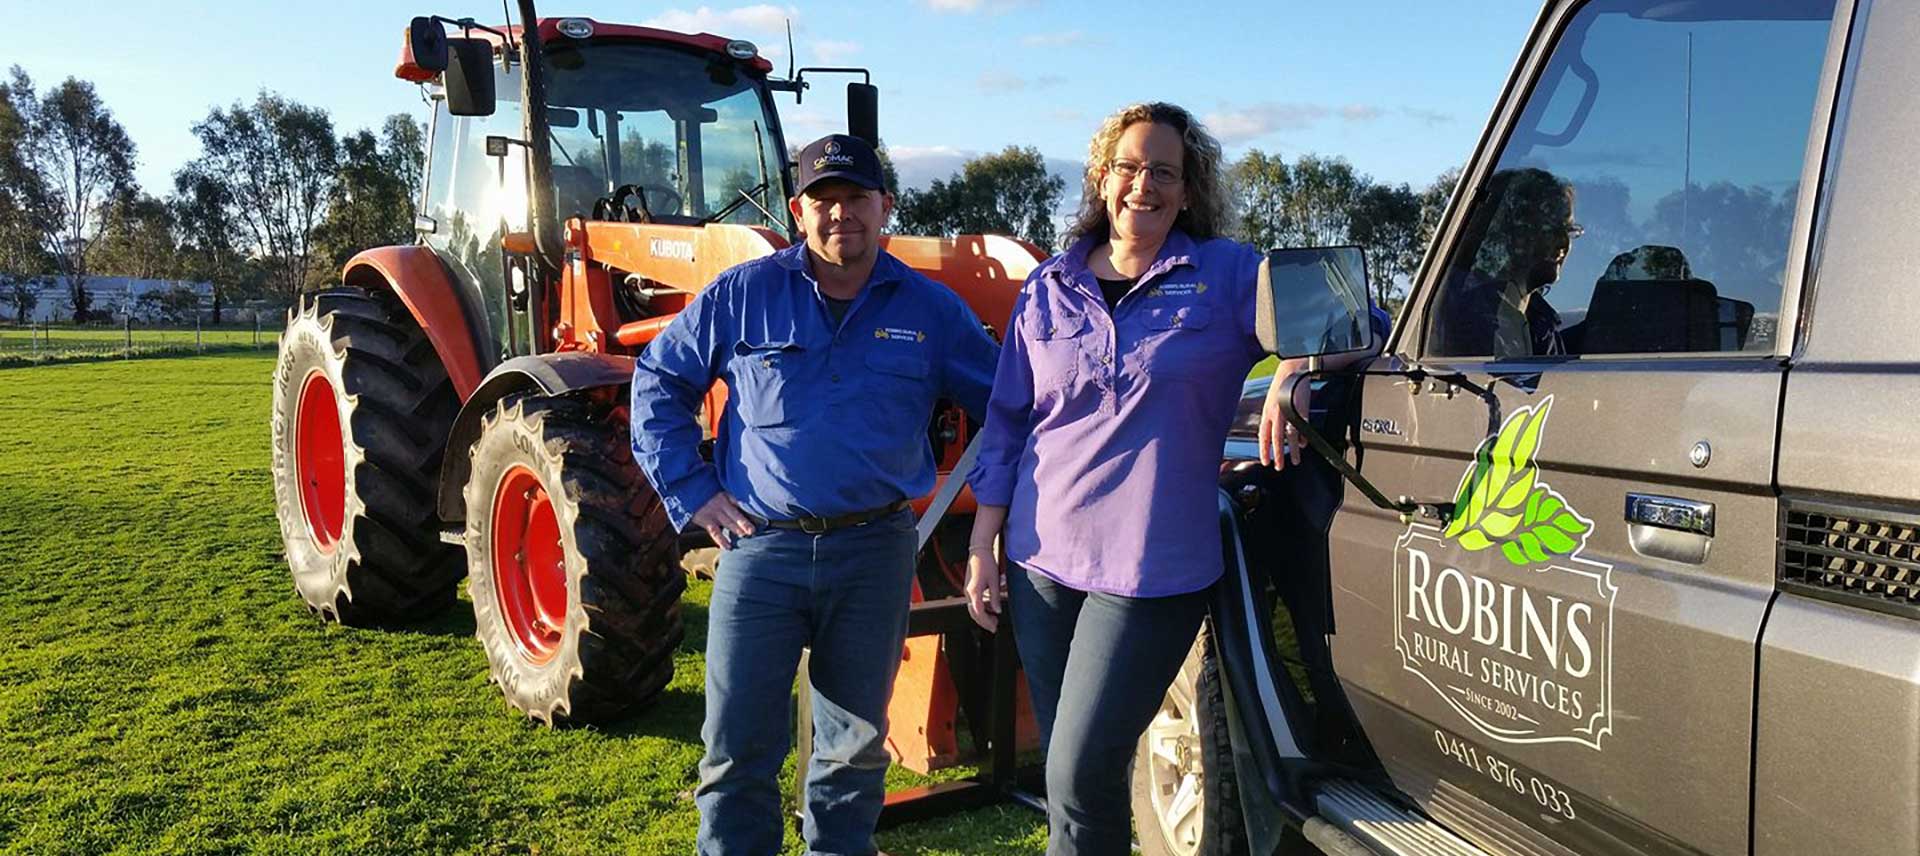 Steve & Lucy Robins have 15 years of agricultural development experience.